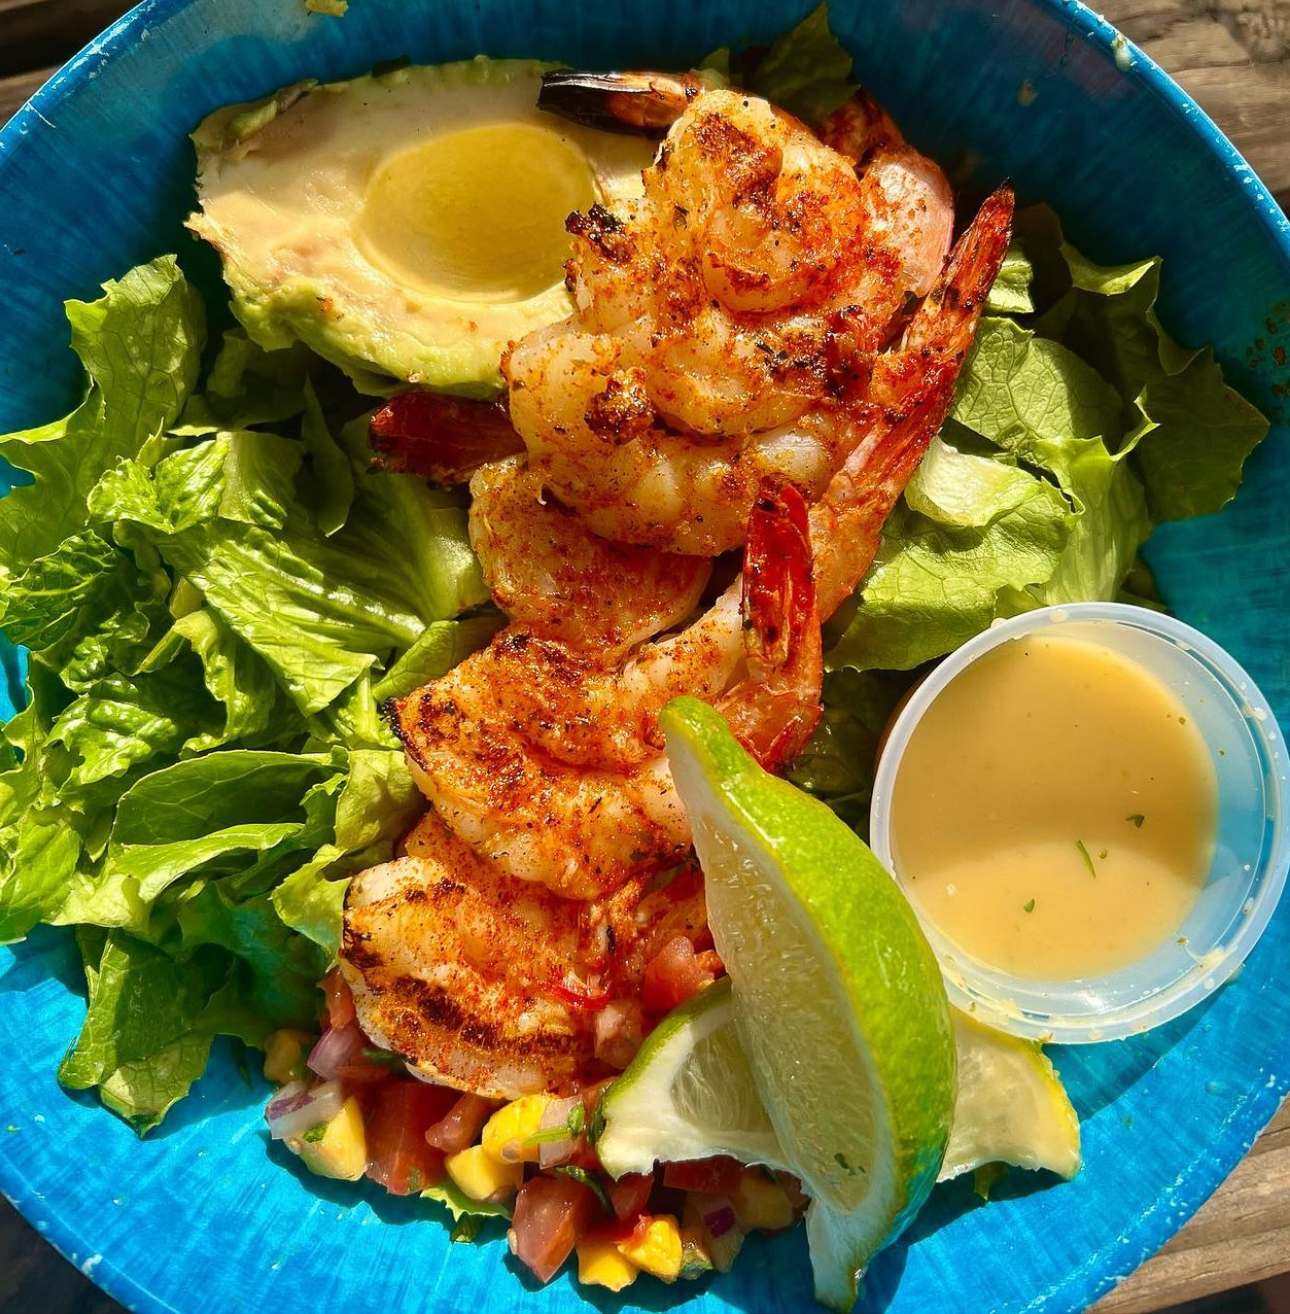 Looking for Wild-Caught Seafood Restaurants in Clermont? Visit Salt Shack on the Lake